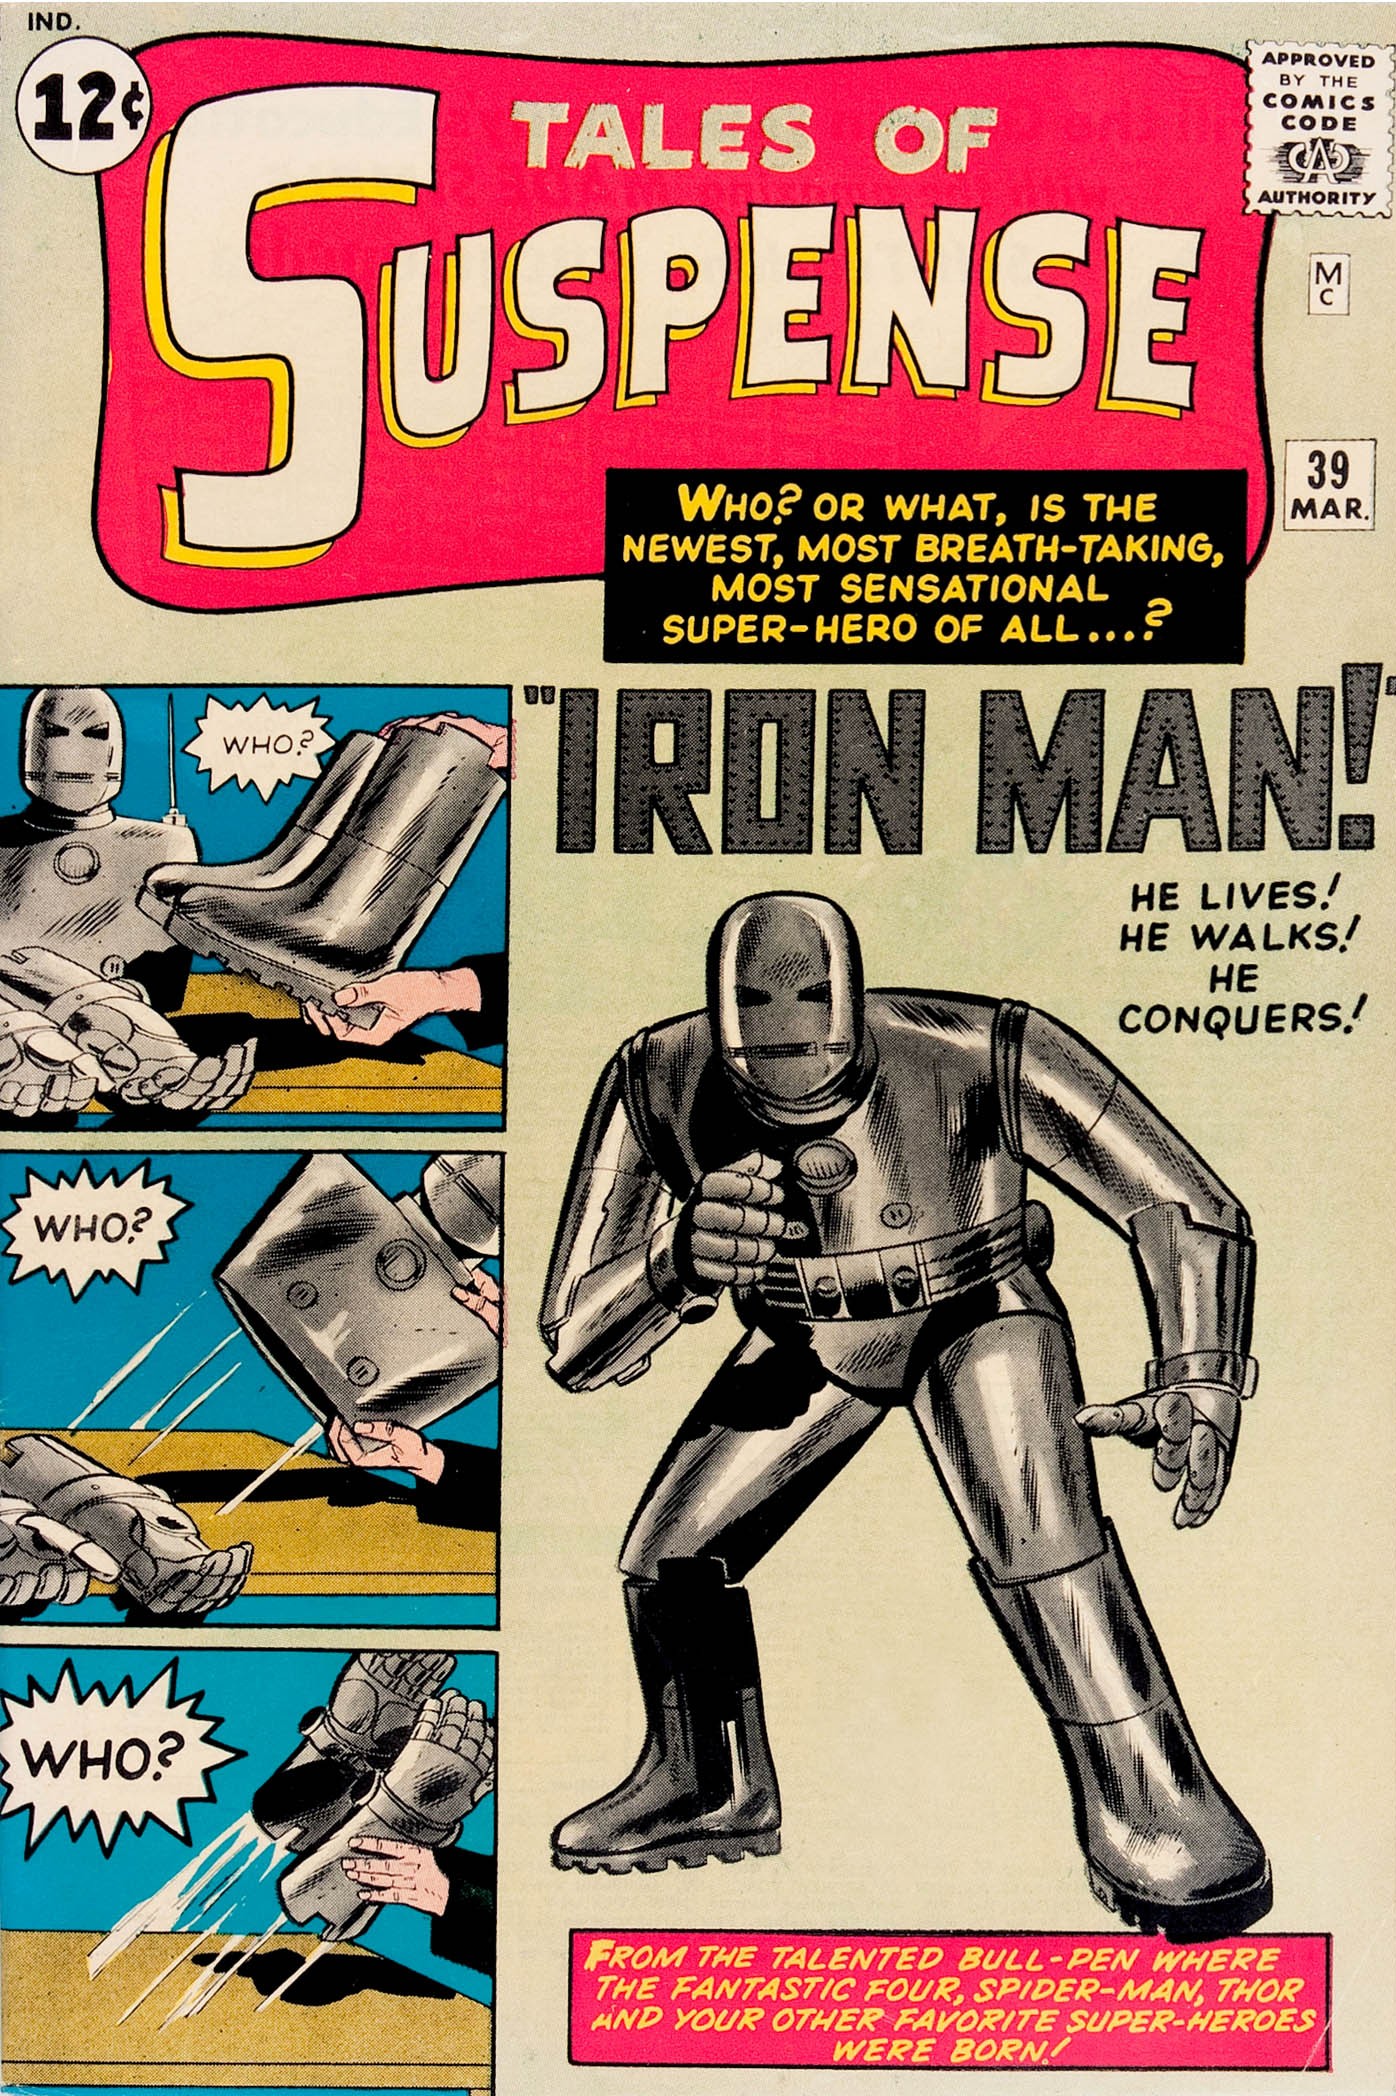 tales-of-suspense-39-iron-man-cover-1963